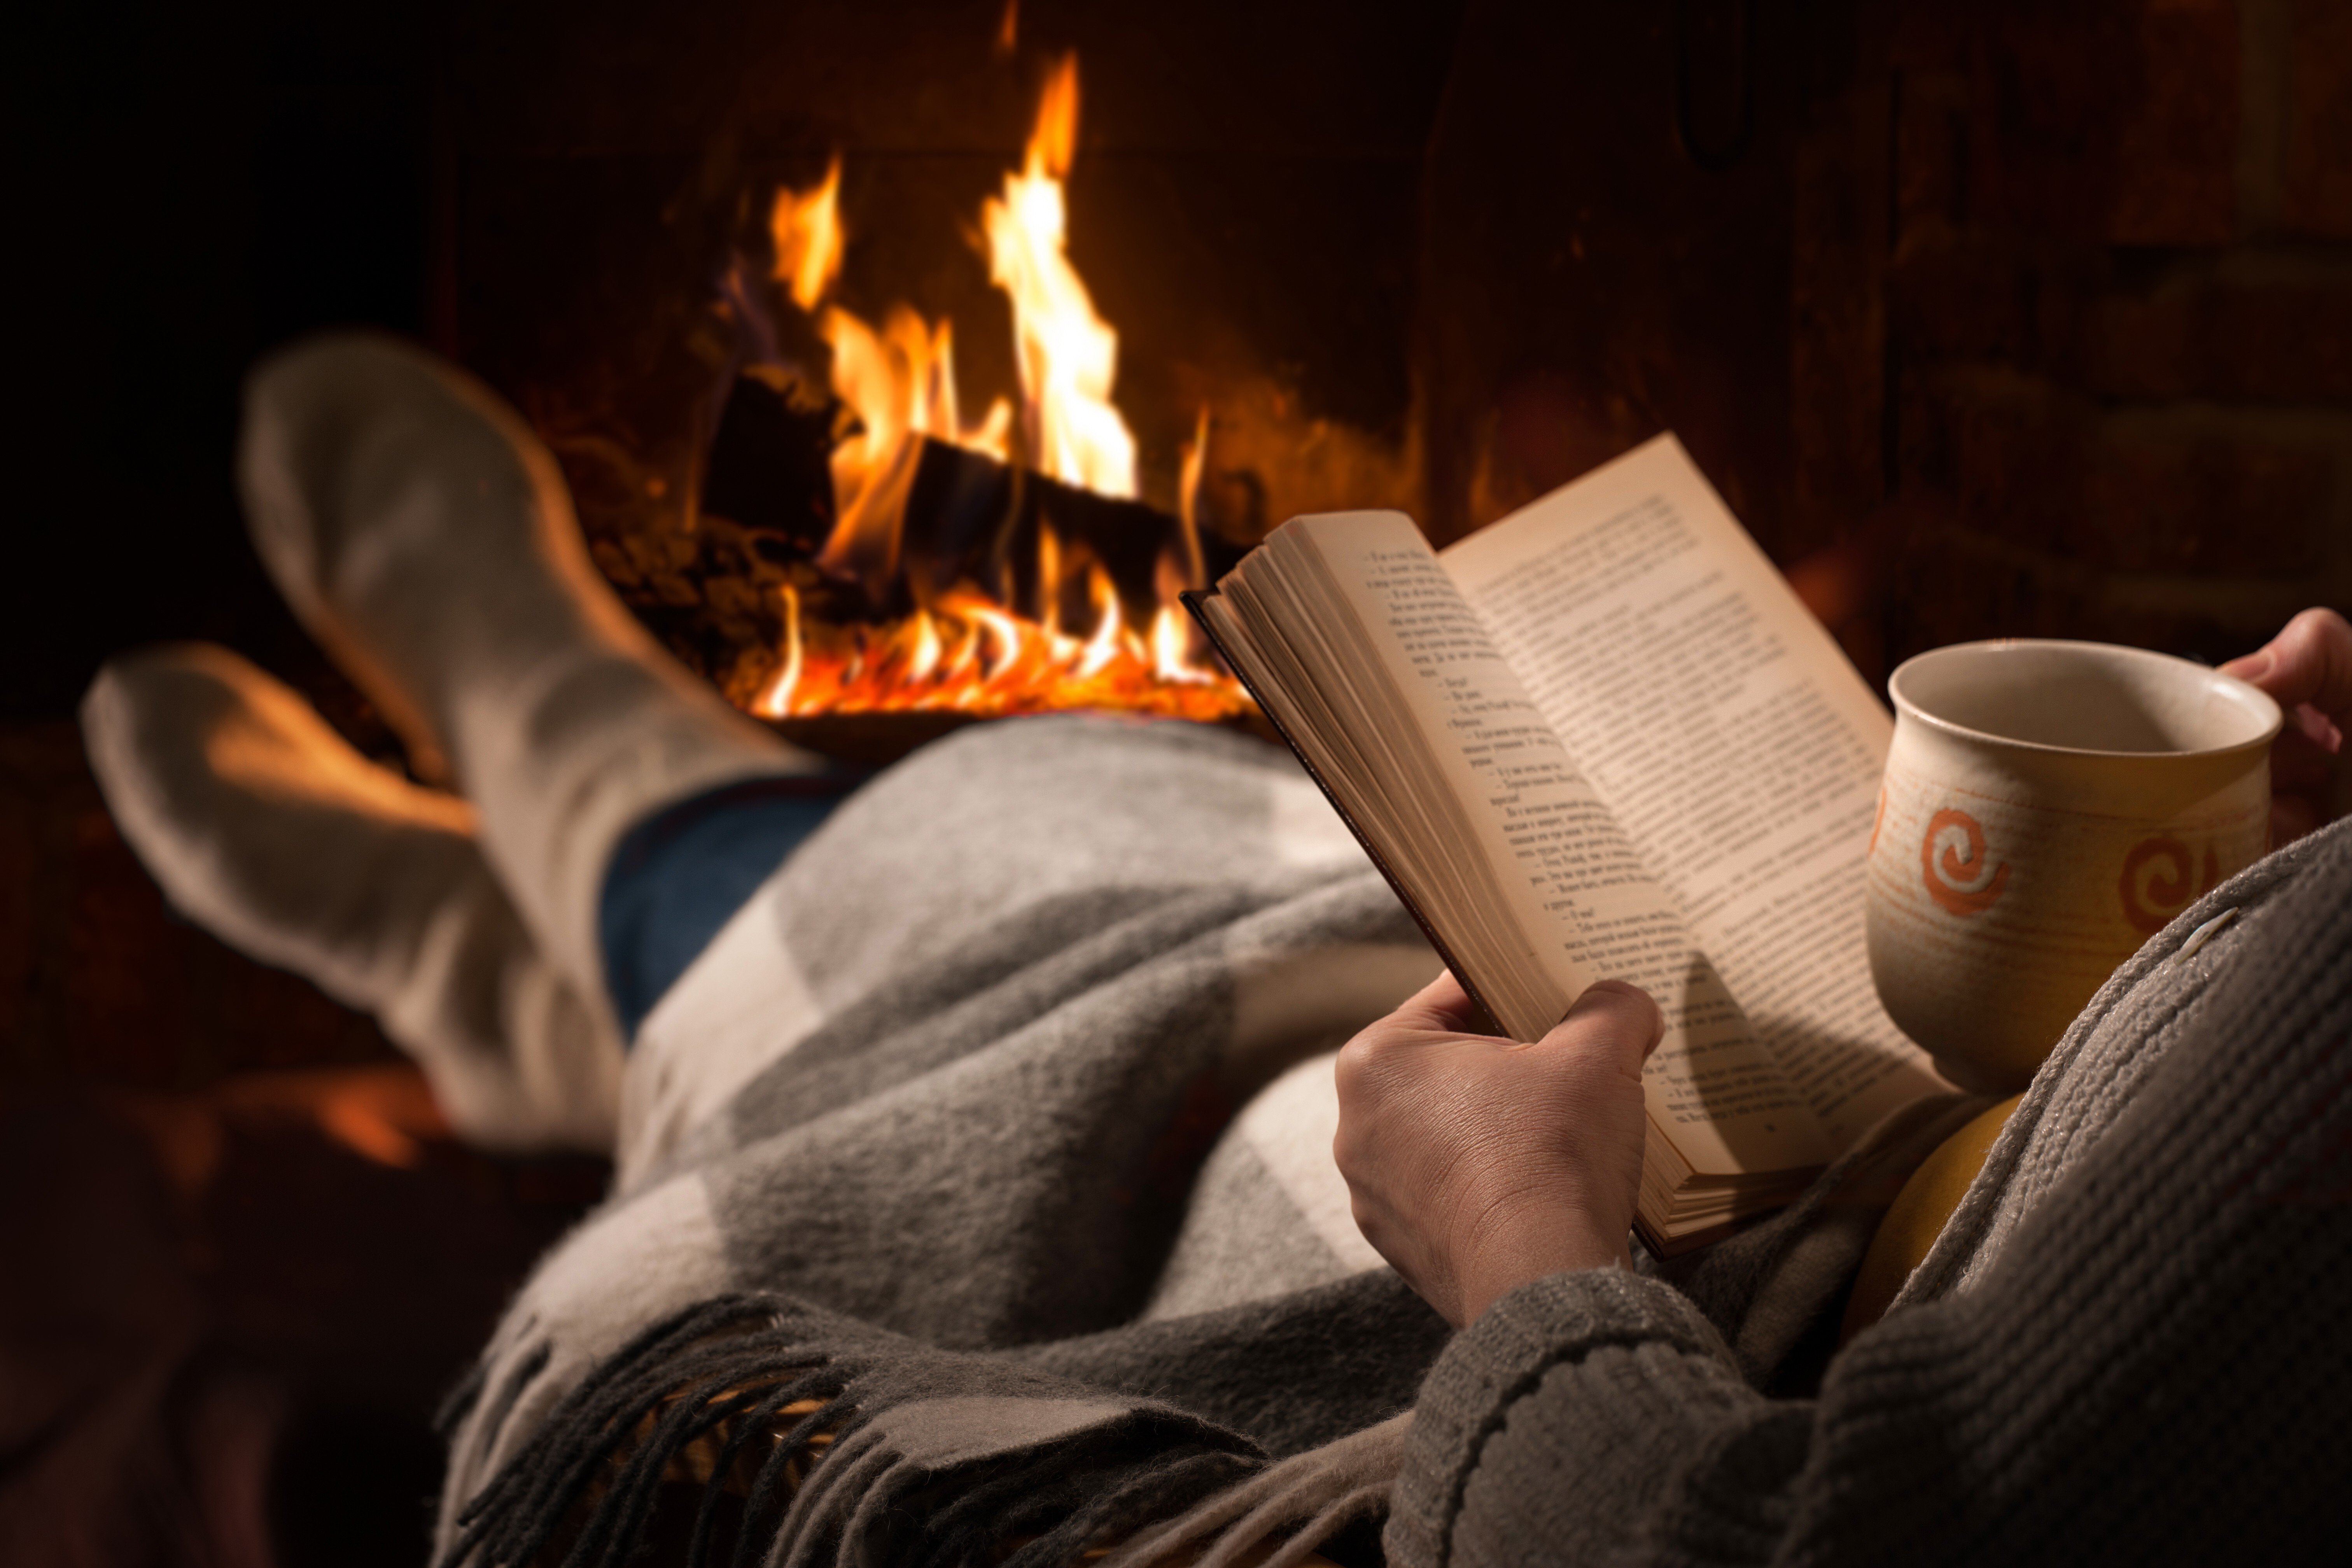 Load up Netflix' Fireplace, make a cup of cocoa, and snuggle up with one of these great reads